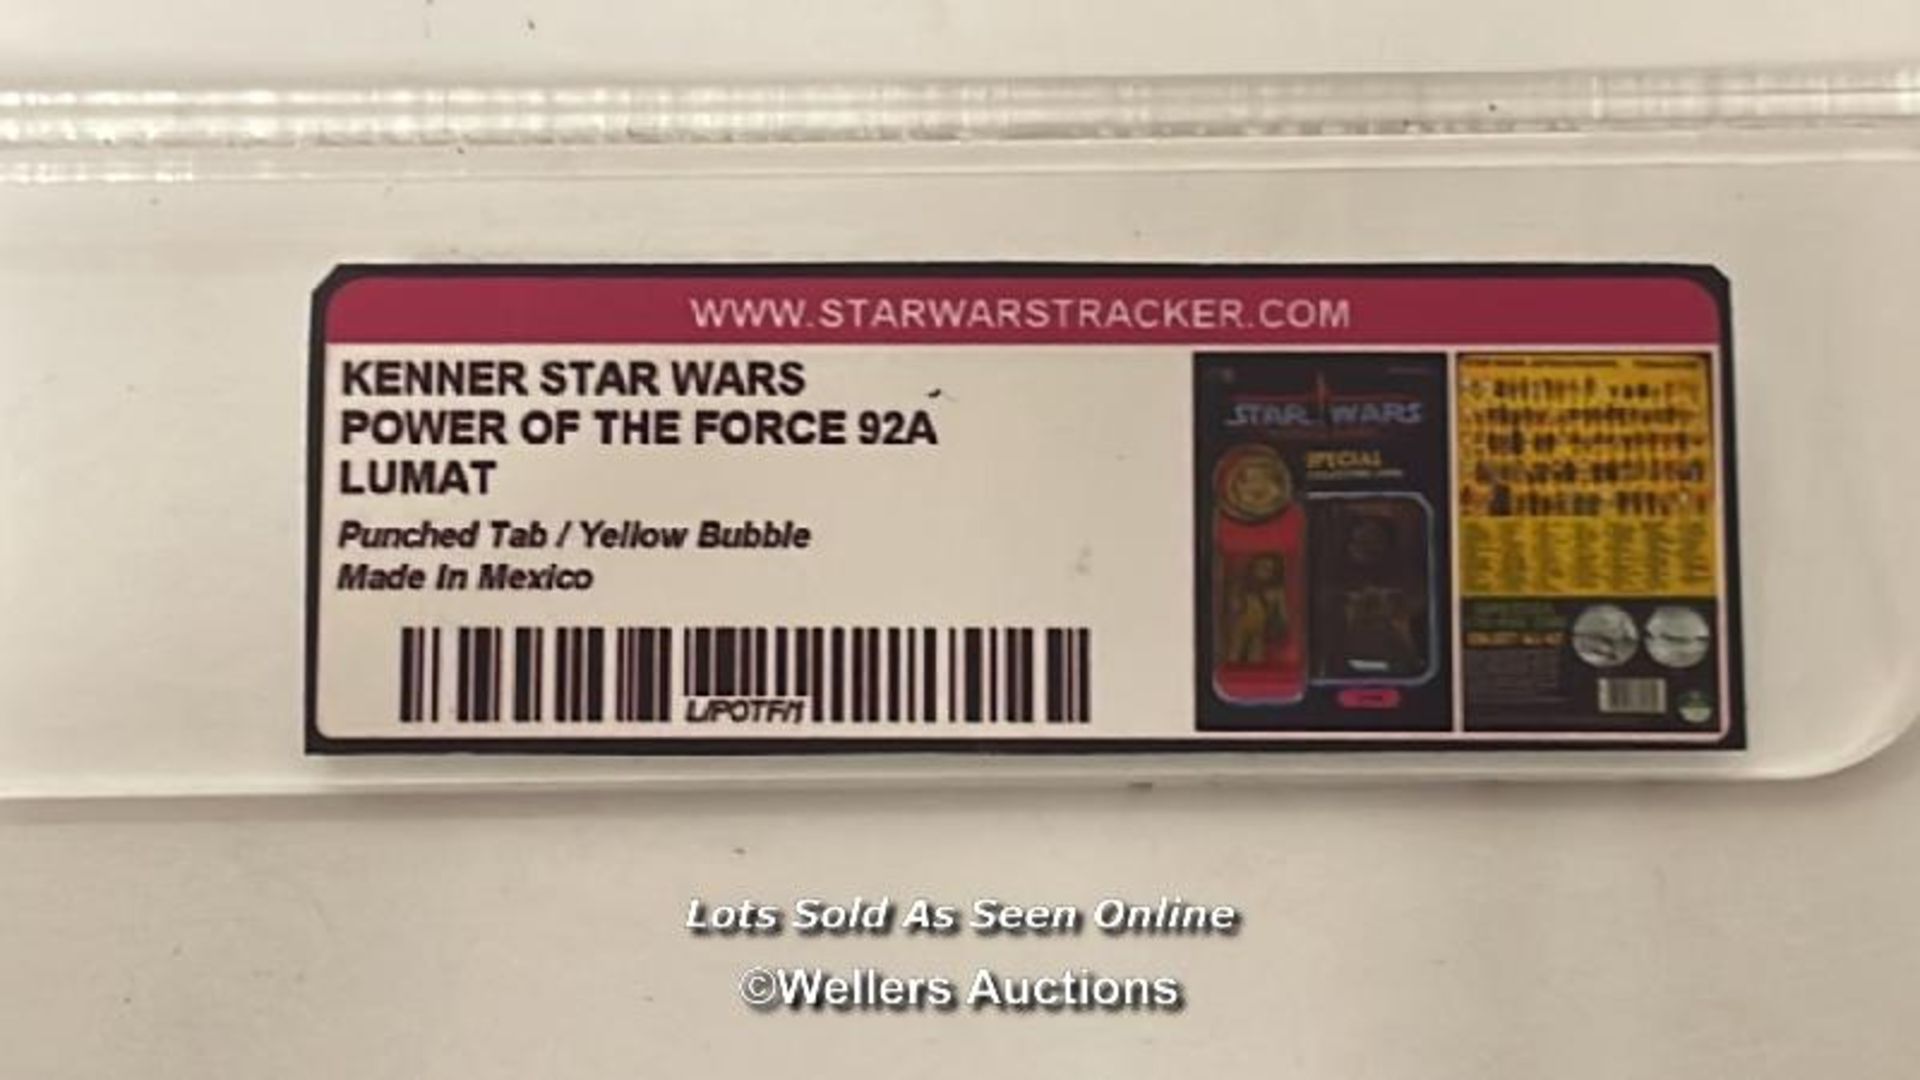 Star Wars vintage Lumat 3 3/4" figure, Power of the Force 92 back with collectors coin, Kenner 1984, - Image 11 of 11